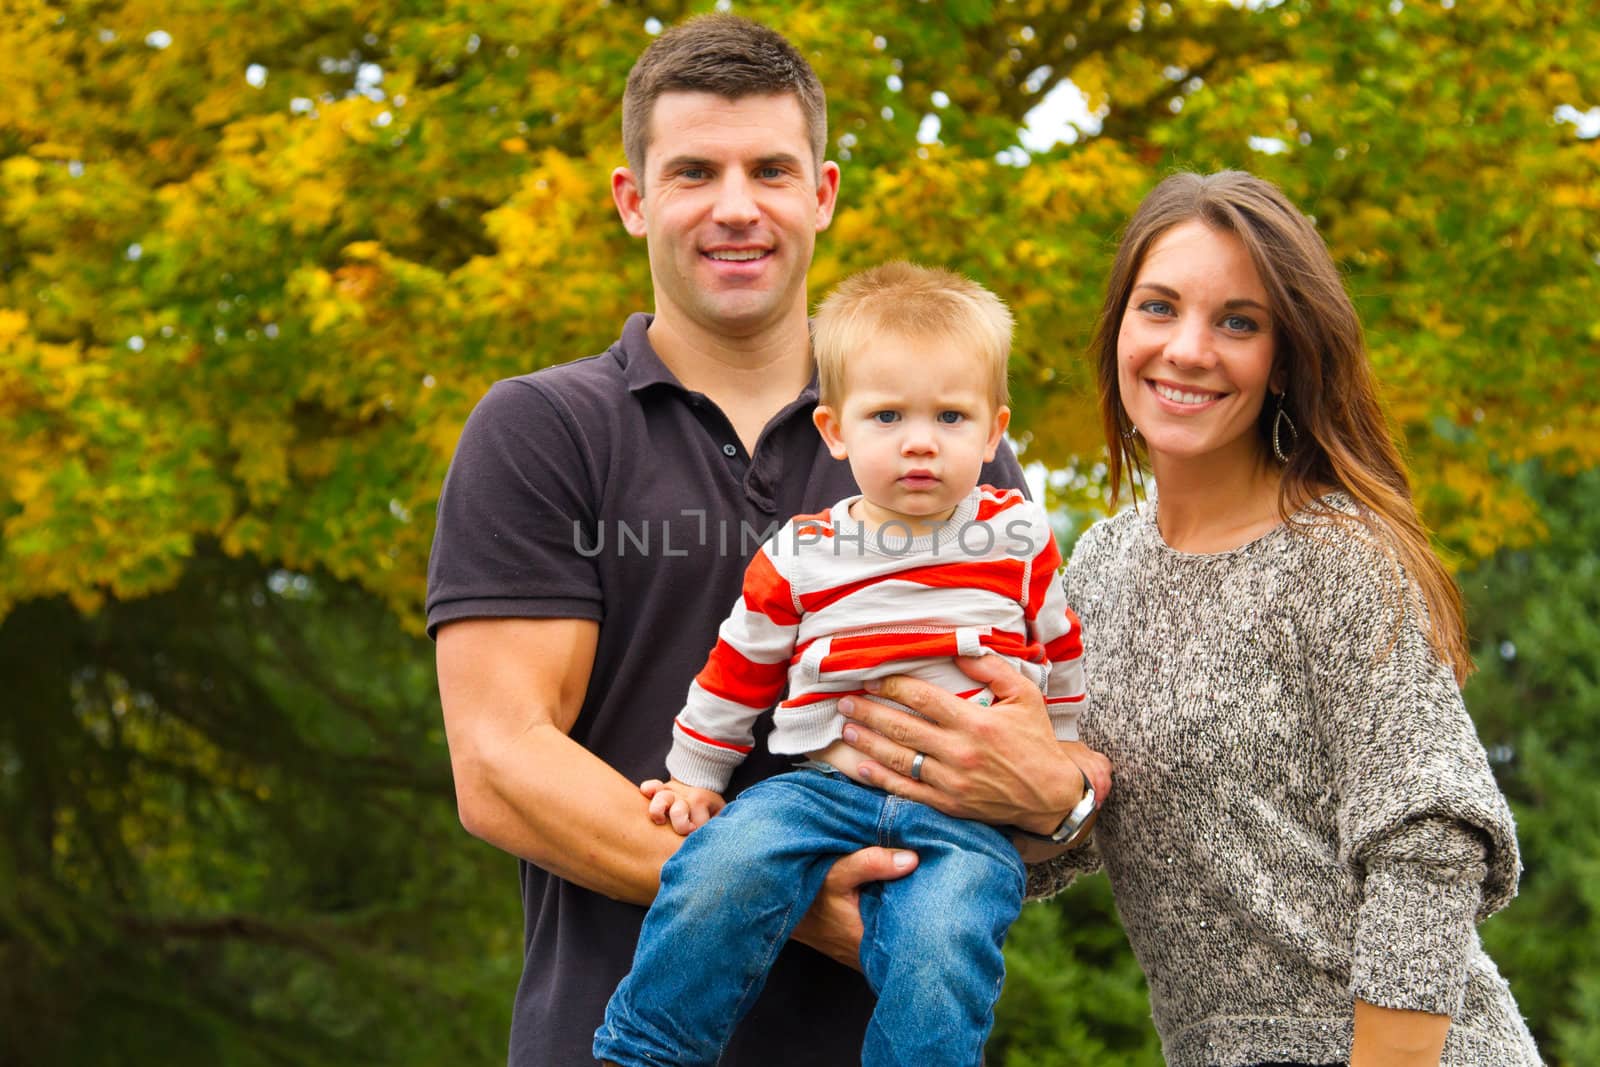 A husband and wife have their first child and pose for a portrait with the boy.